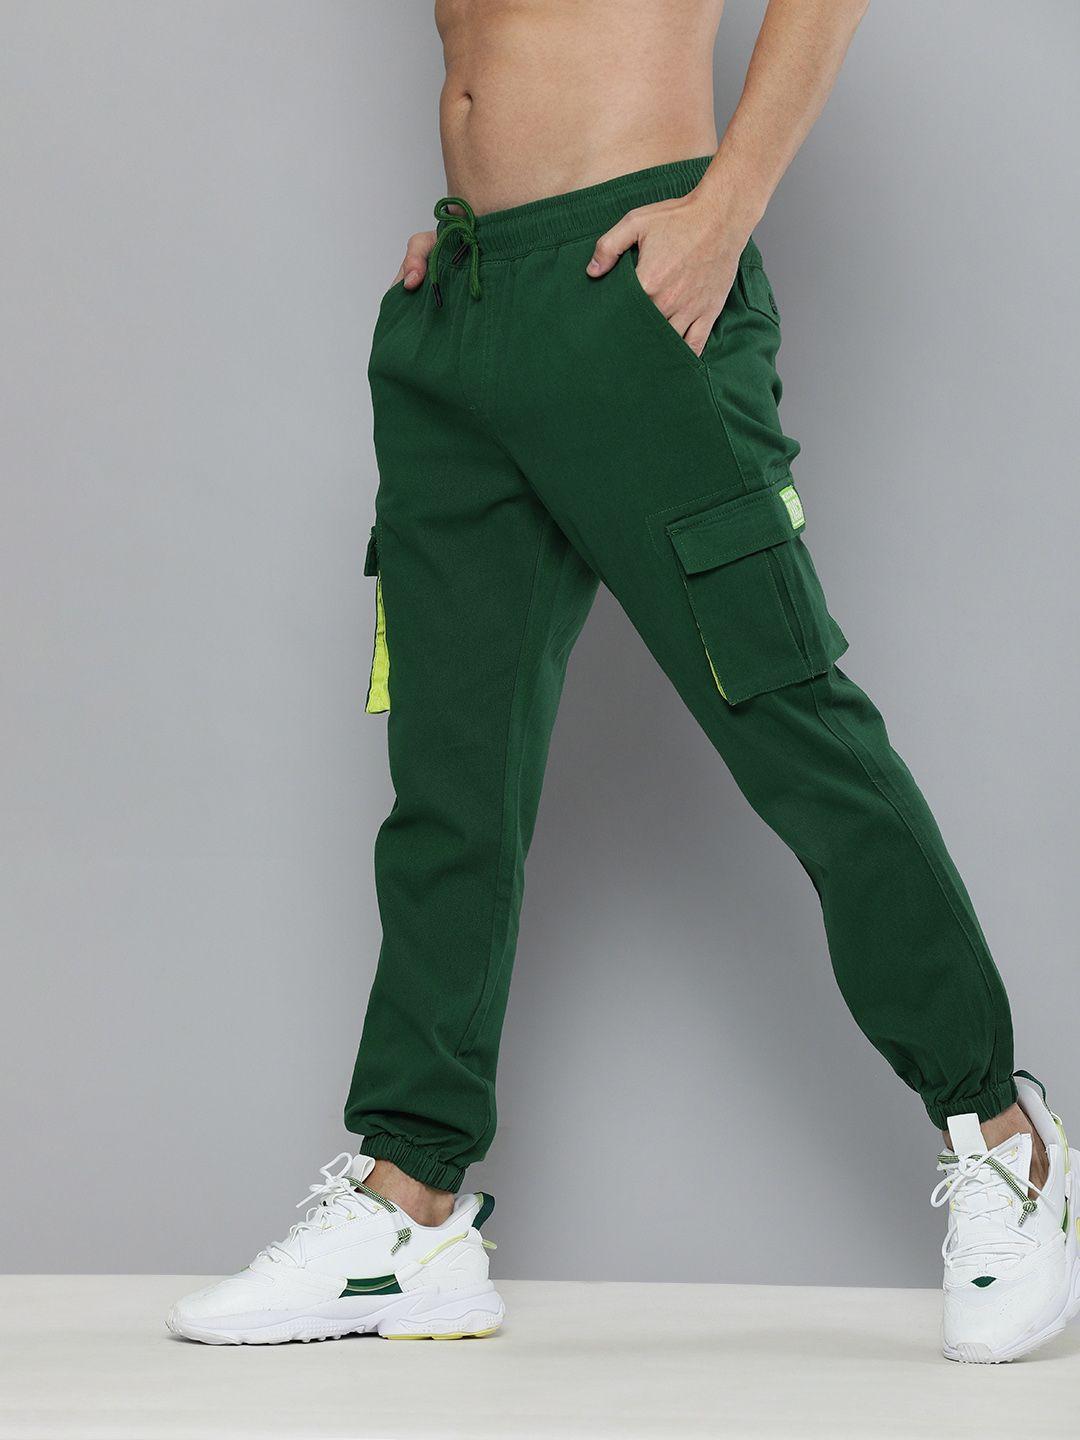 here&now-men-green-cargo-joggers-trousers